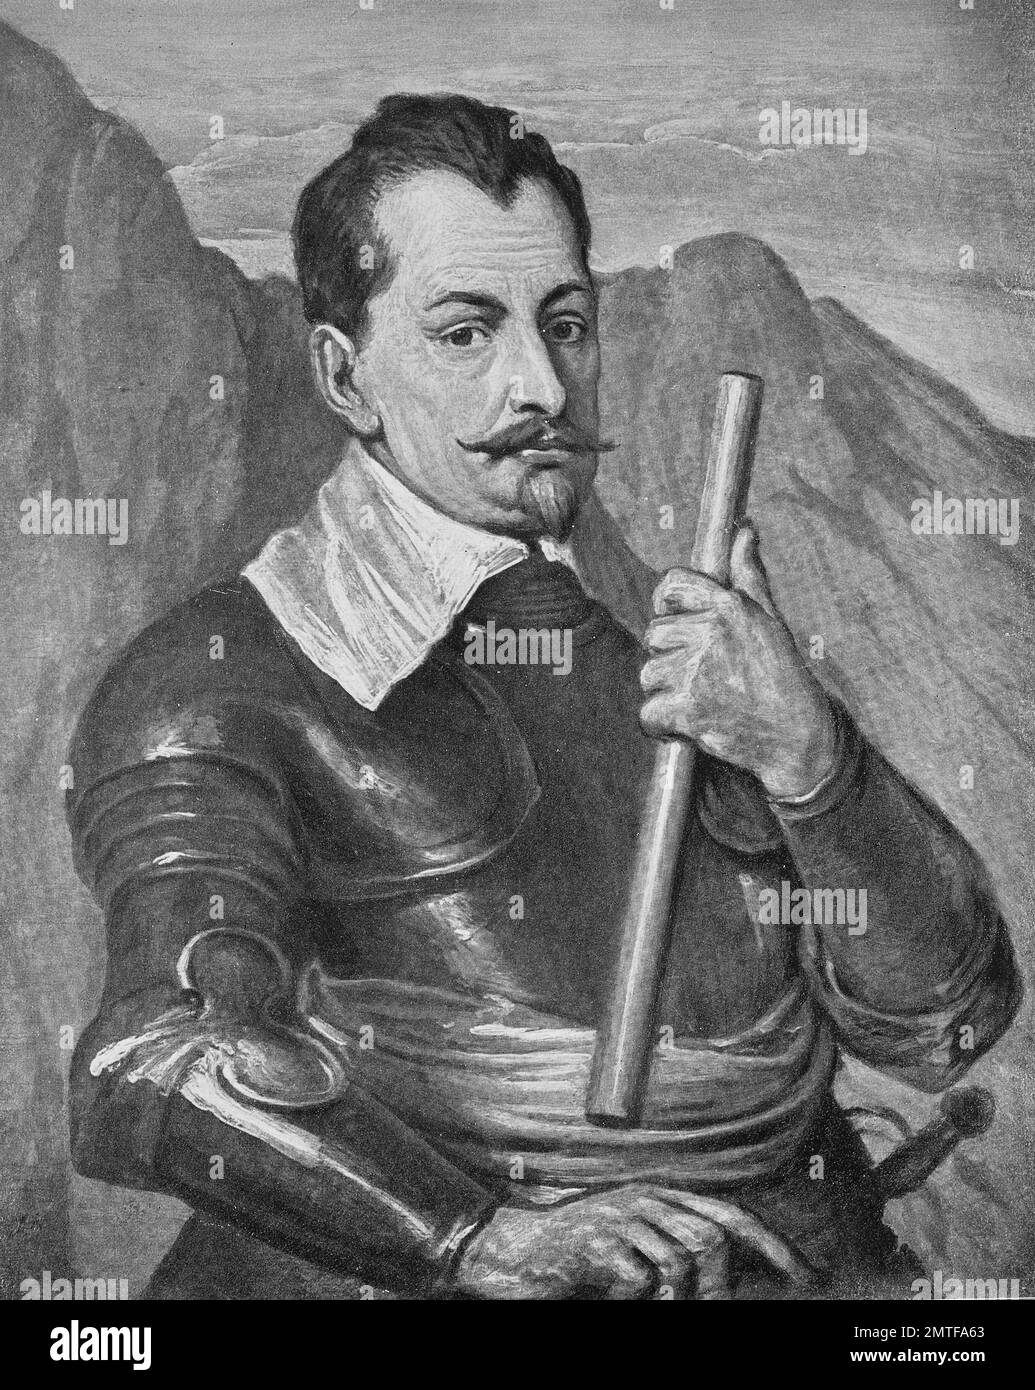 Albrecht Wenzel Eusebius von Wallenstein, also von Waldstein, was a Bohemian[a] military leader and politician who offered his services, and an army of 30,000 to 100,000 men, during the Thirty Years' War, to the Holy Roman Emperor Ferdinand II Stock Photo